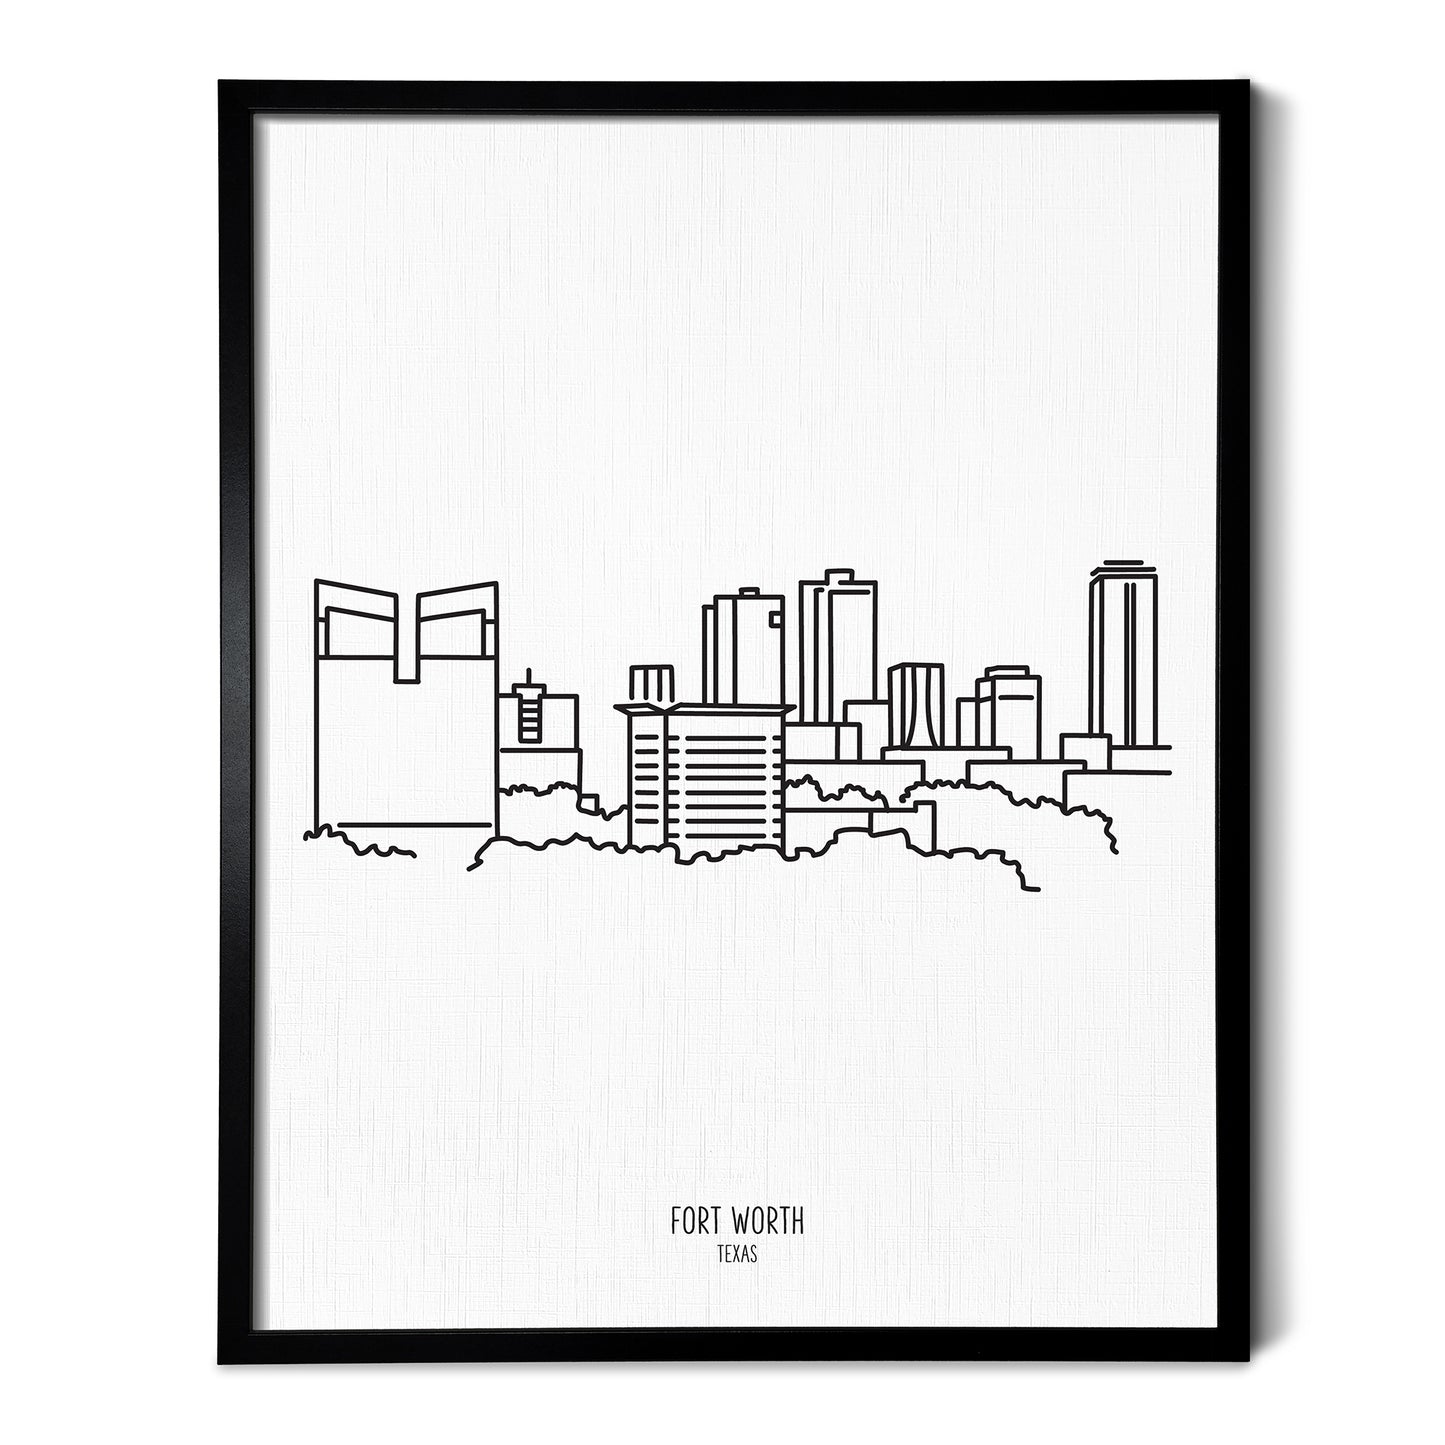 A line art drawing of the Fort Worth Texas Skyline on white linen paper in a thin black picture frame